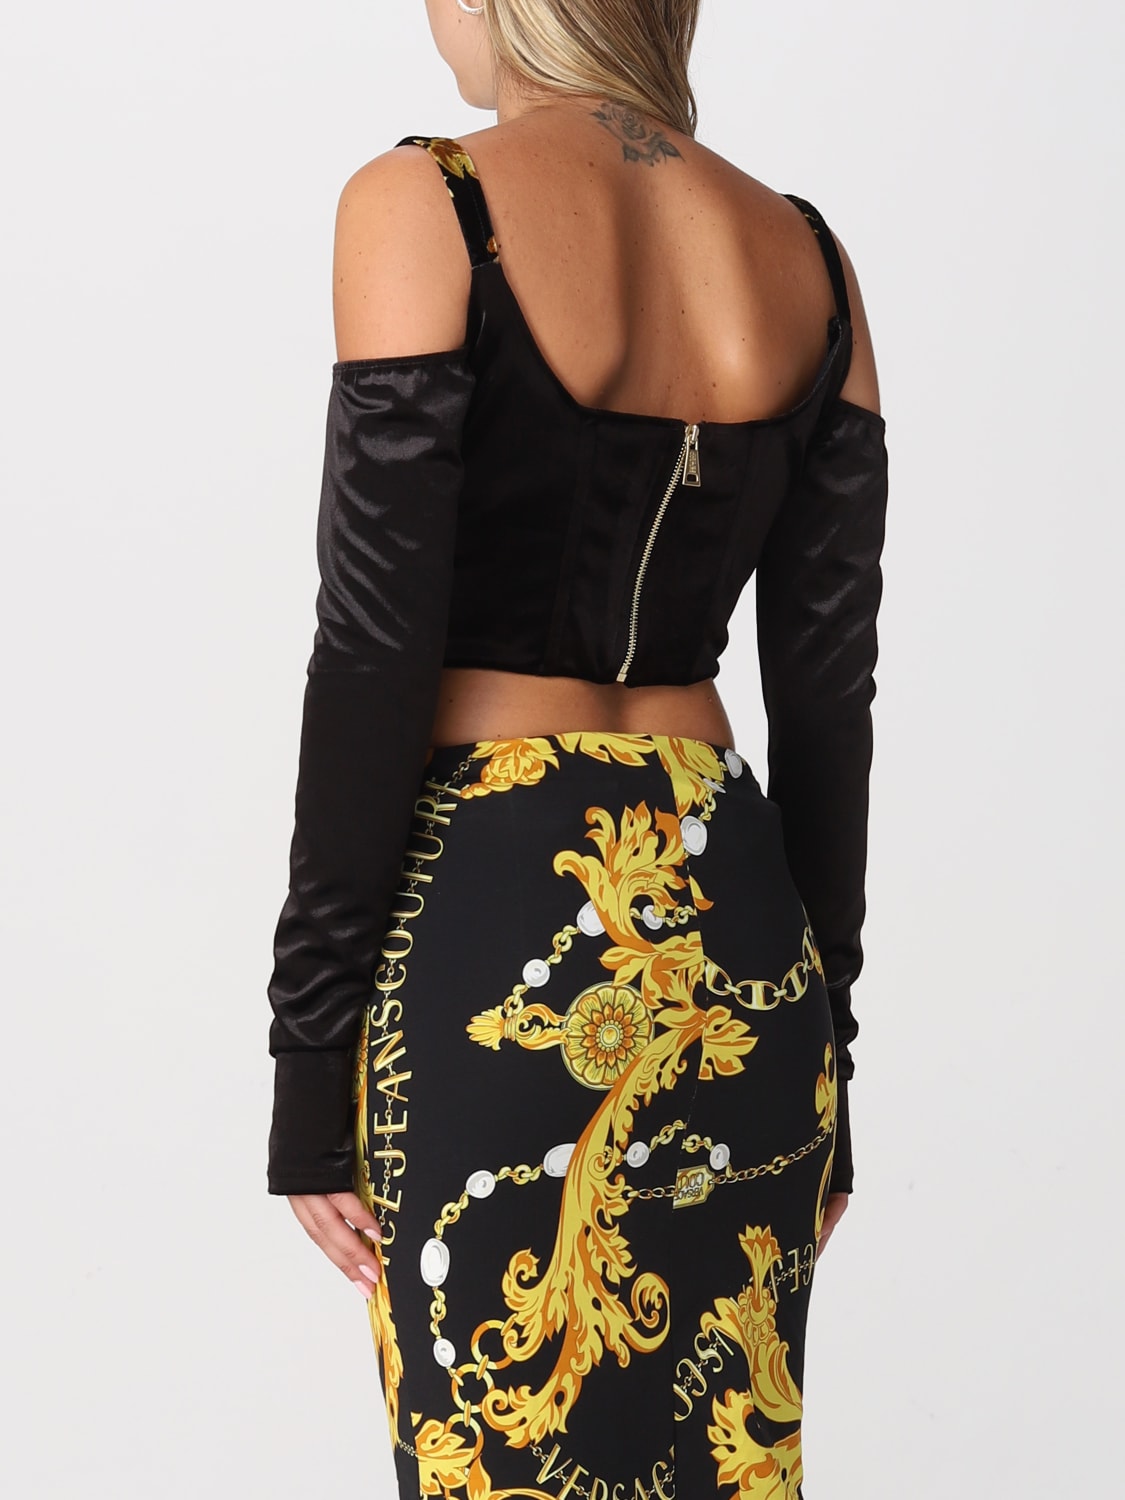 VERSACE JEANS COUTURE：トップス レディース - ブラック | GIGLIO.COM ...